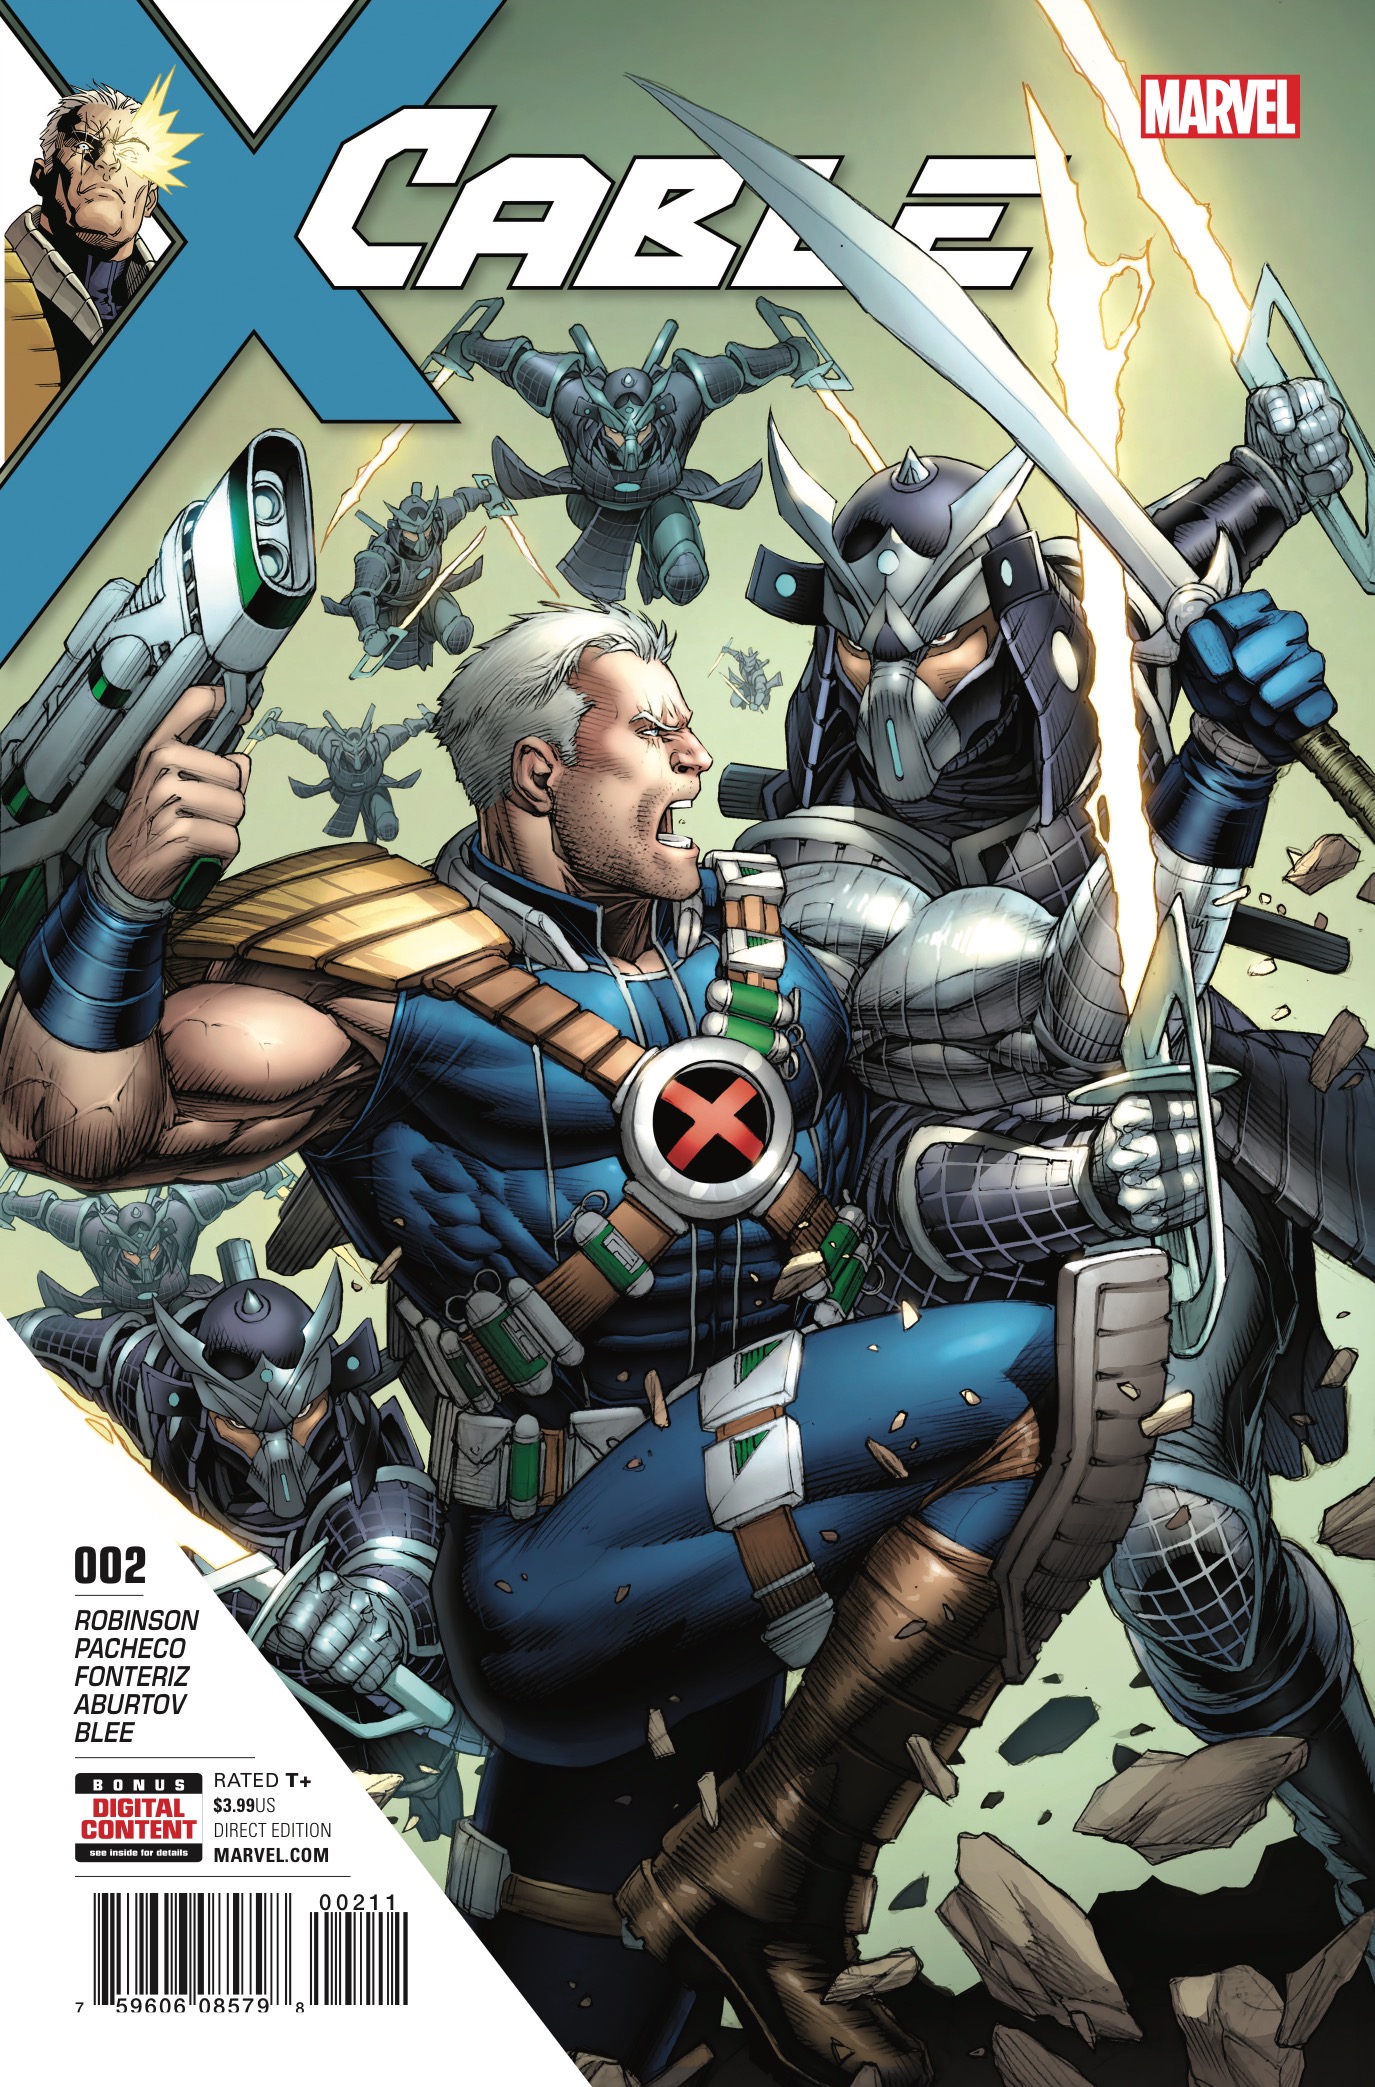 Marvel Preview: Cable #2